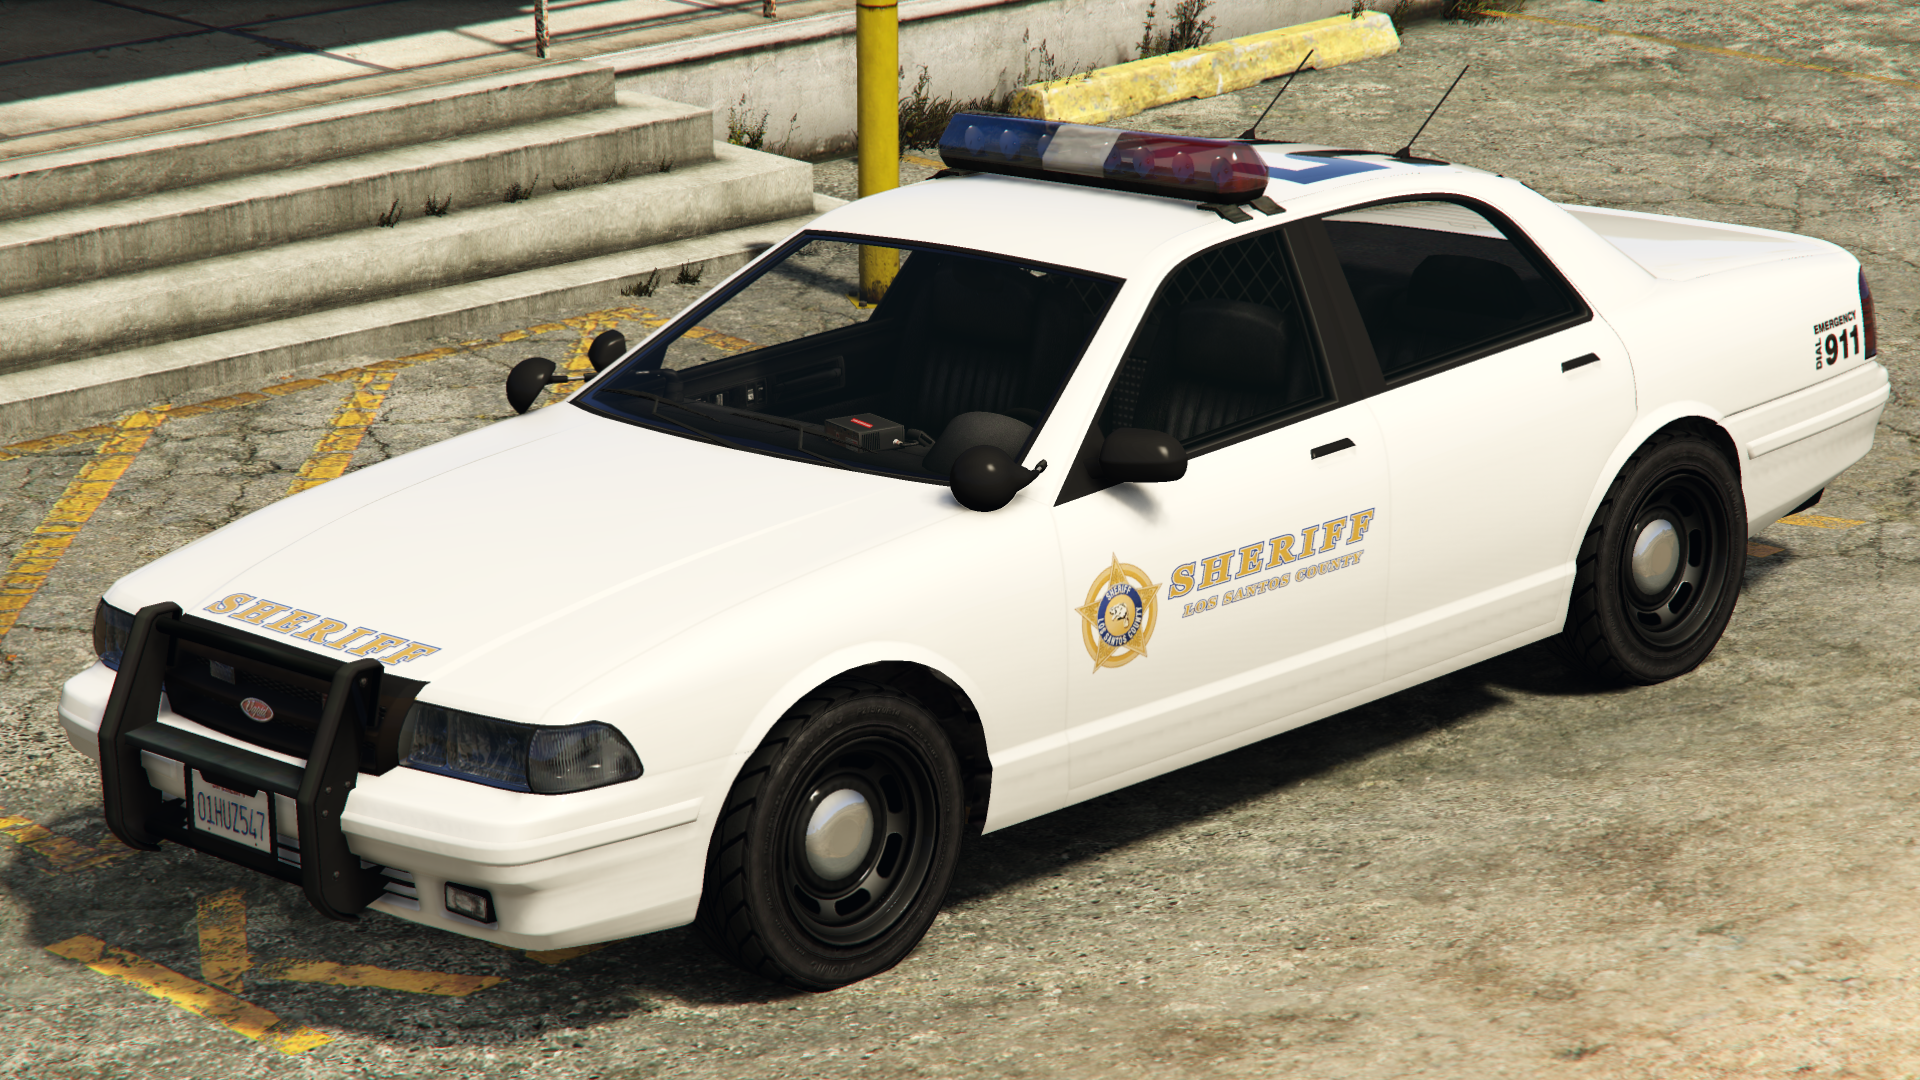 how to install police cars in gta 5